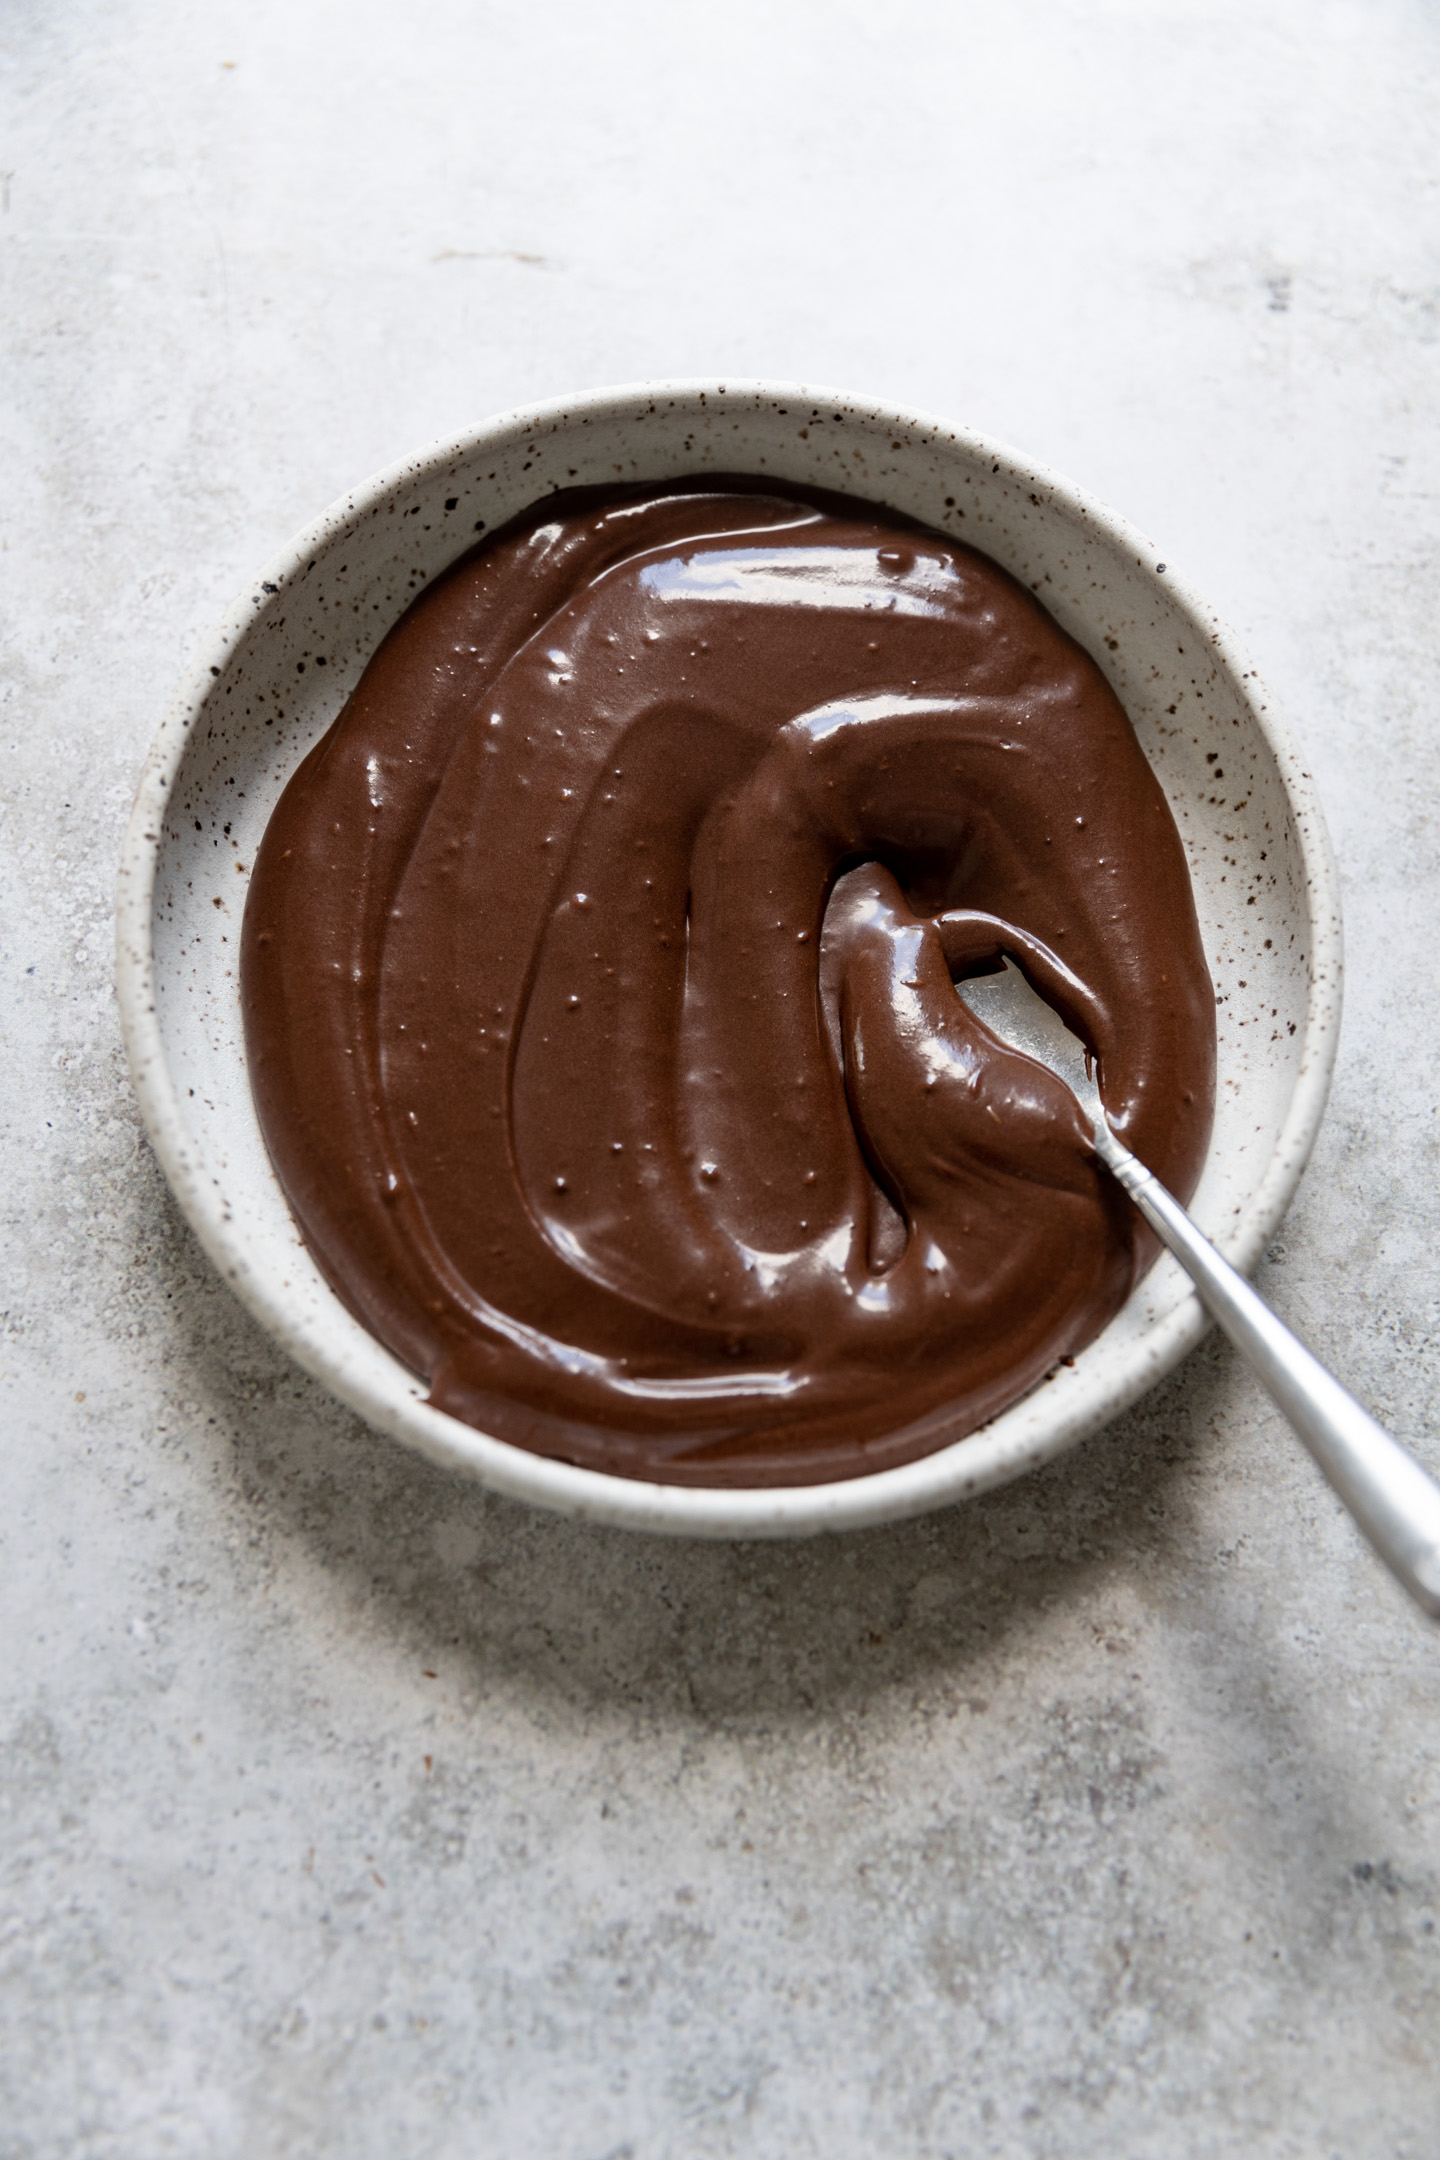 Chocolate glaze in a shallow bowl with a spoon.